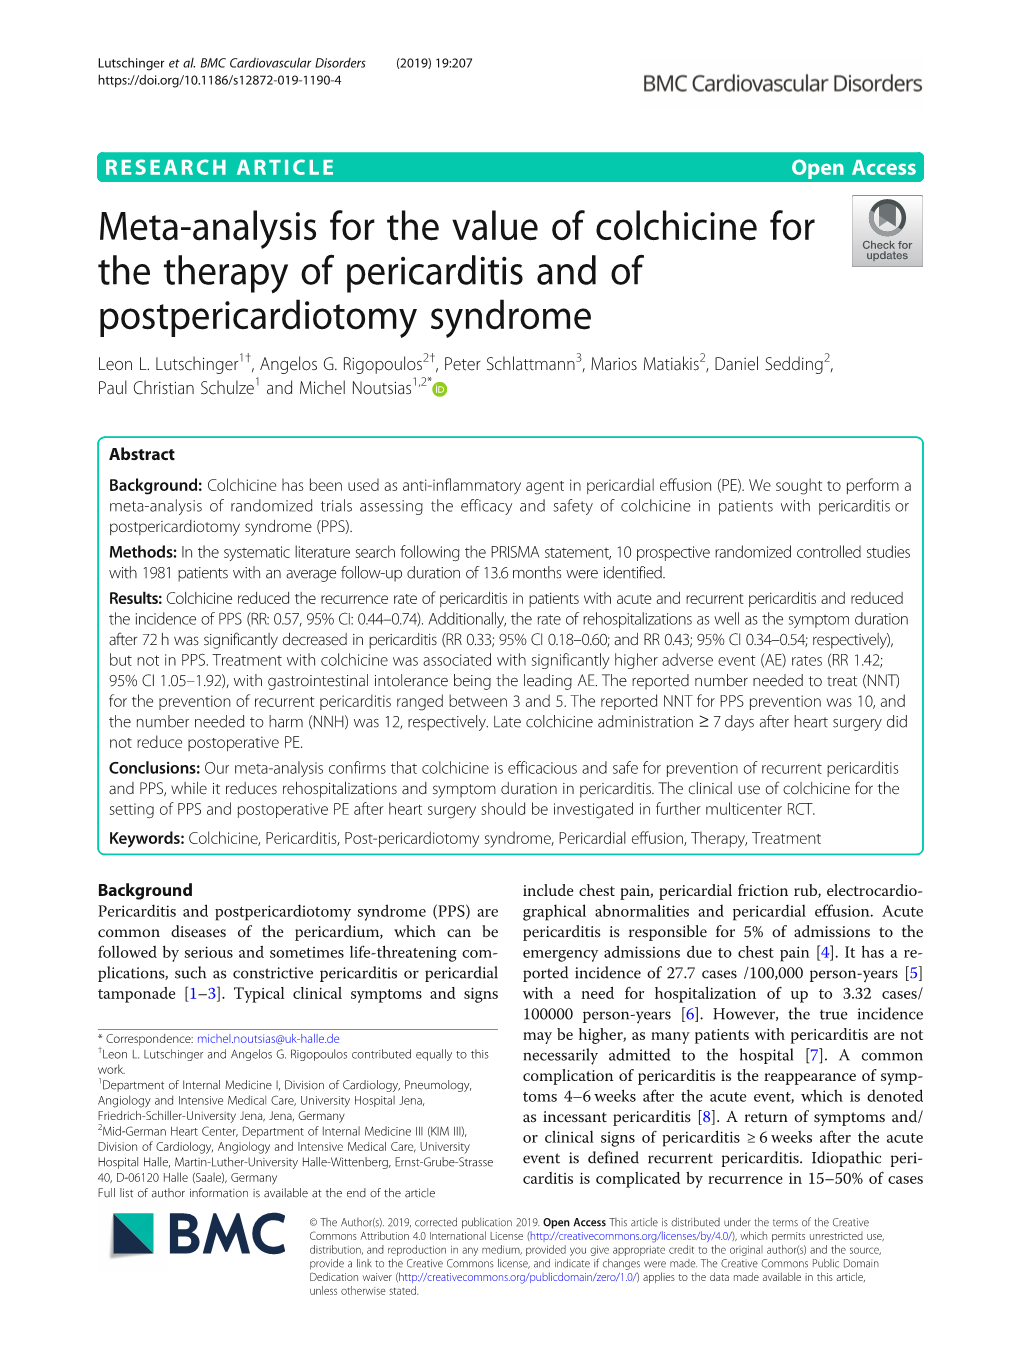 Meta-Analysis for the Value of Colchicine for the Therapy of Pericarditis and of Postpericardiotomy Syndrome Leon L